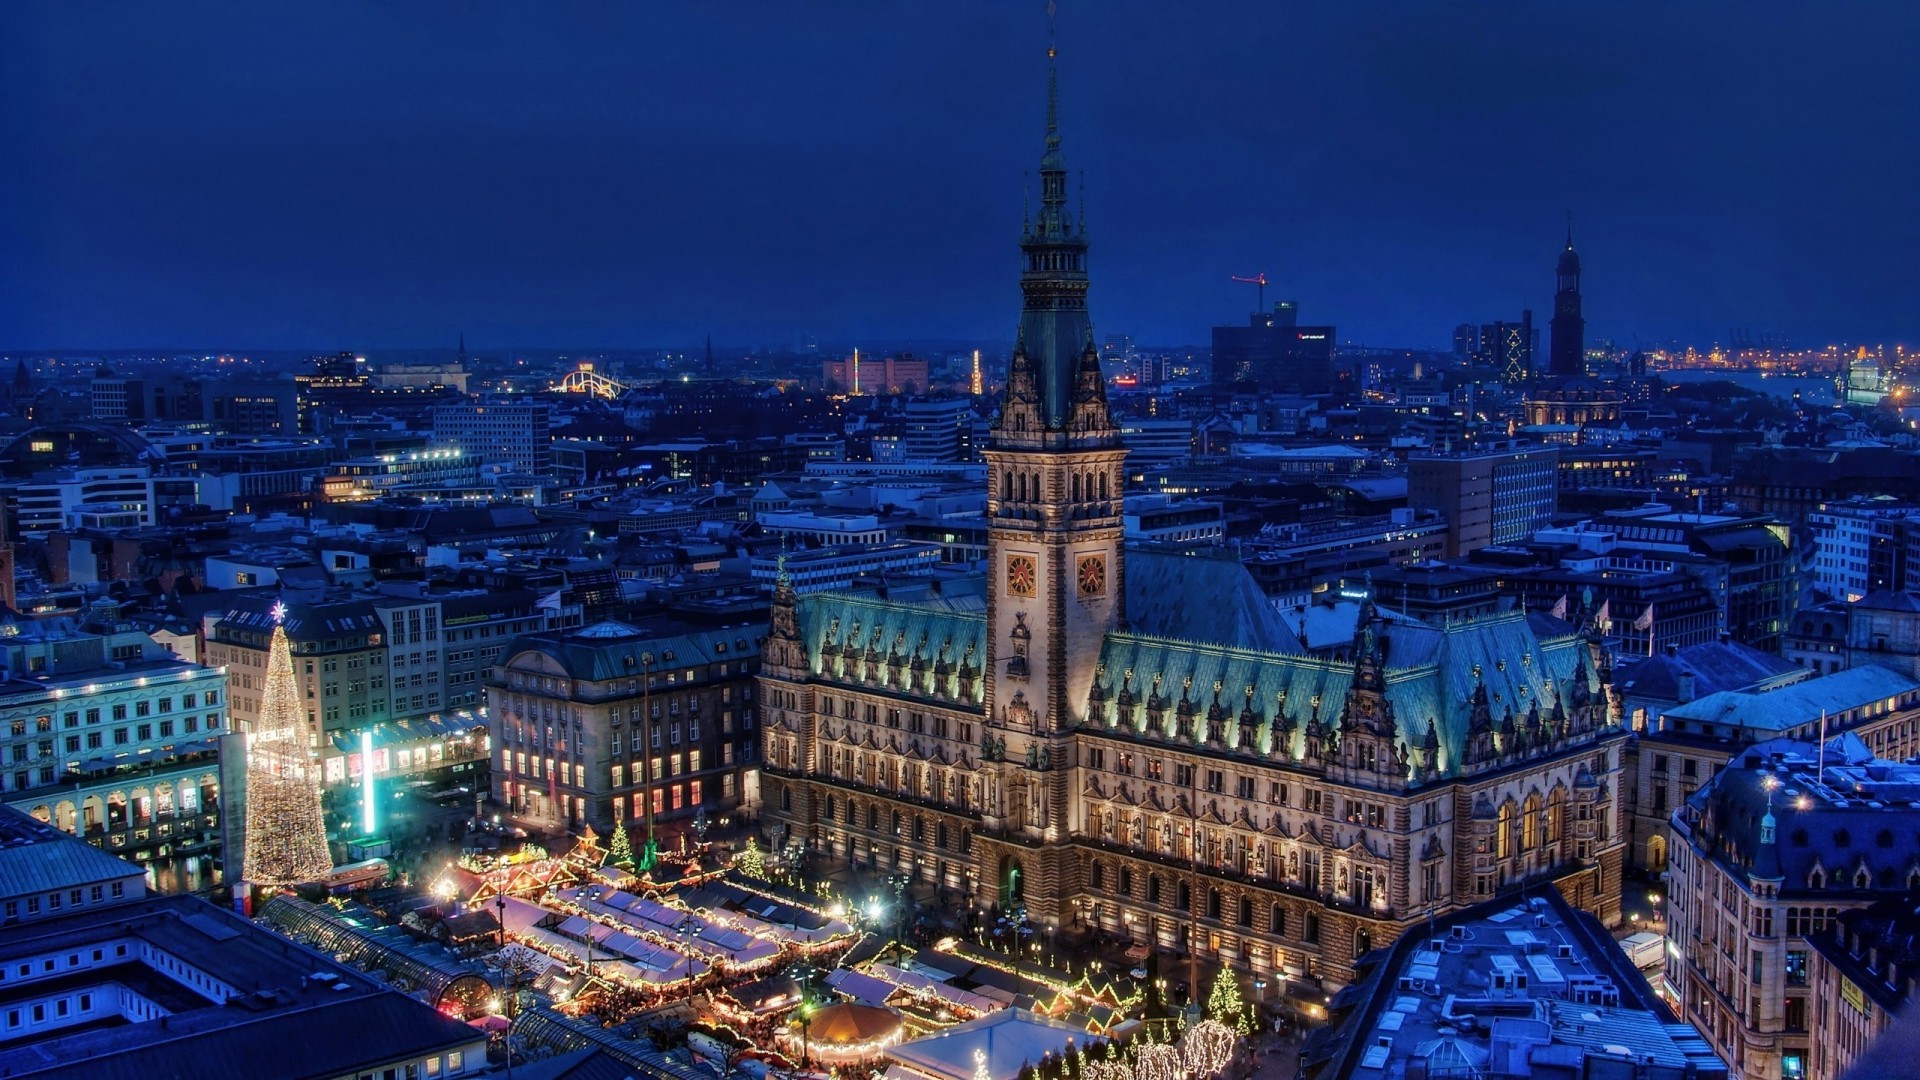 cityscape, Architecture, Tower, Old Building, Germany, Hamburg, Town Square, Rooftops, Markets, Christmas Tree, Evening, Church, Winter, Lights, Street, Bird's Eye View, Aerial View Wallpaper